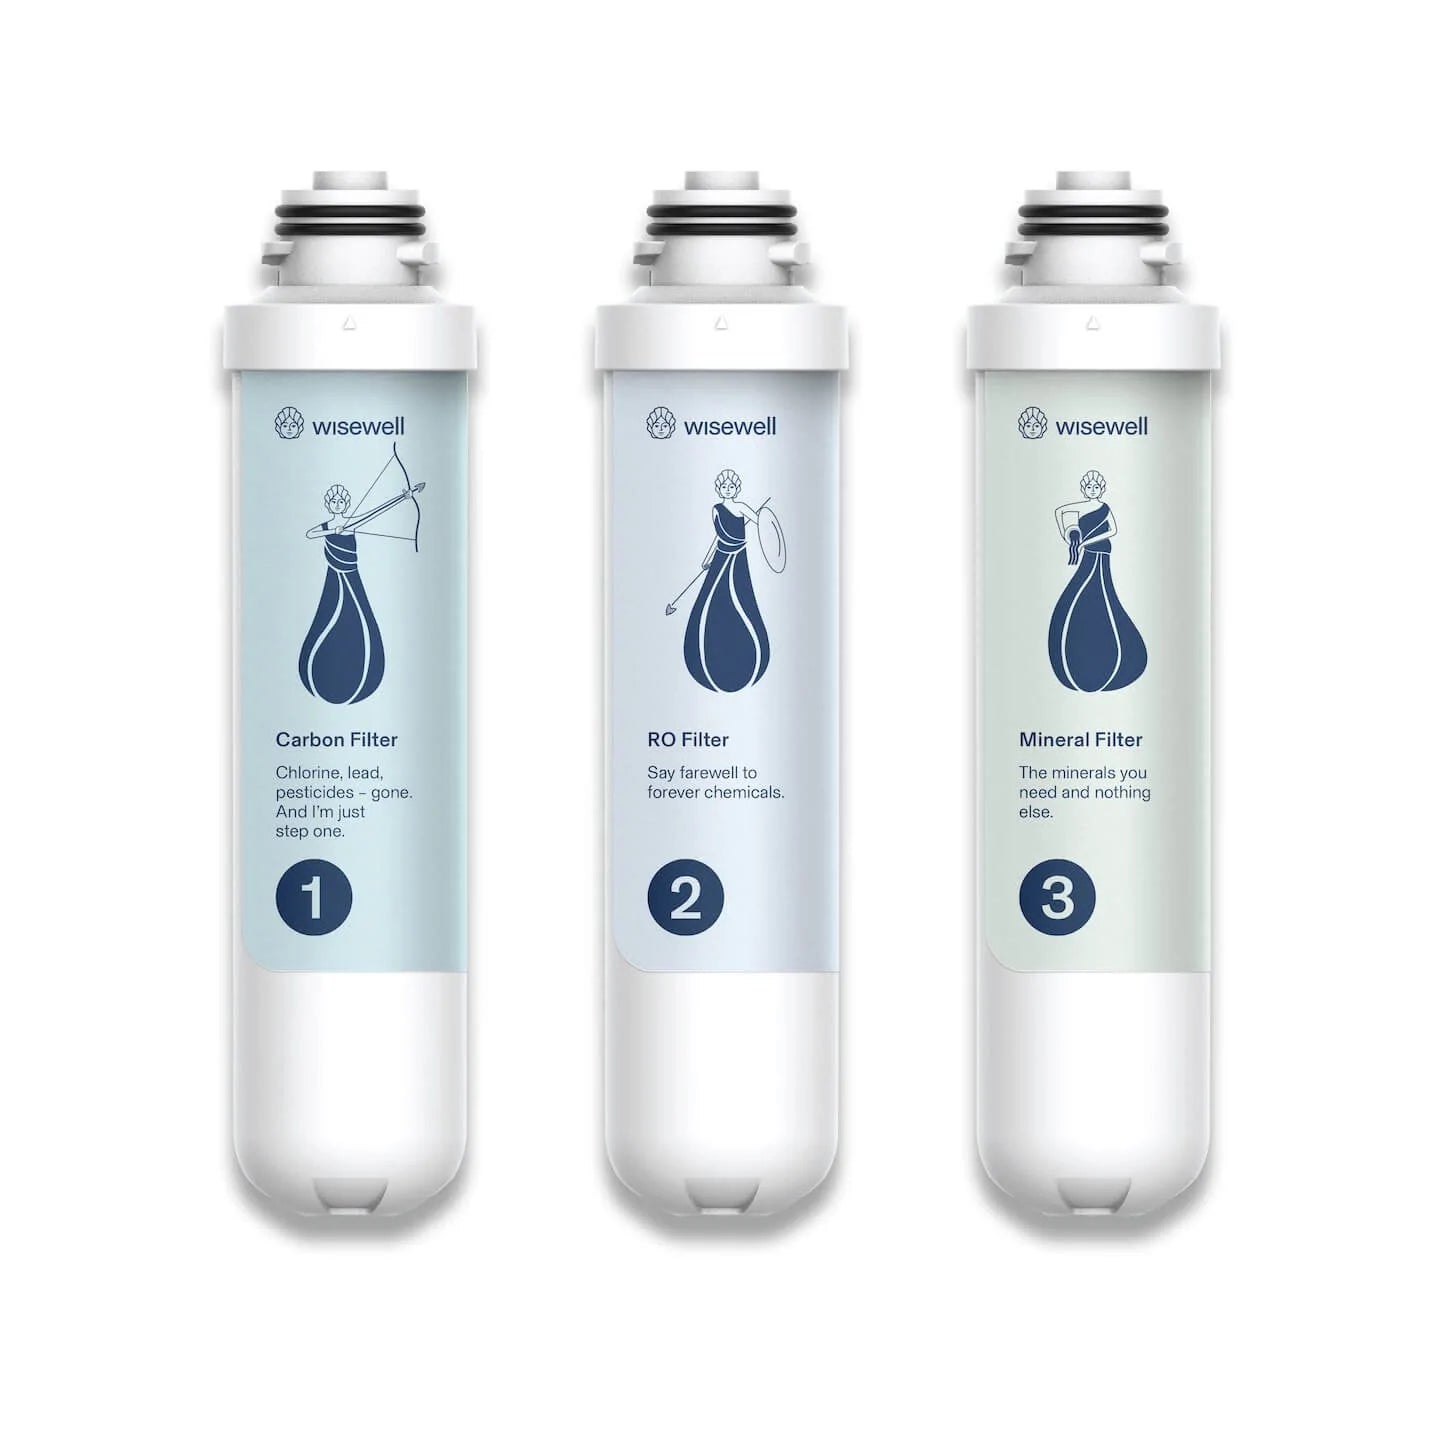 wisewell water filter subscription